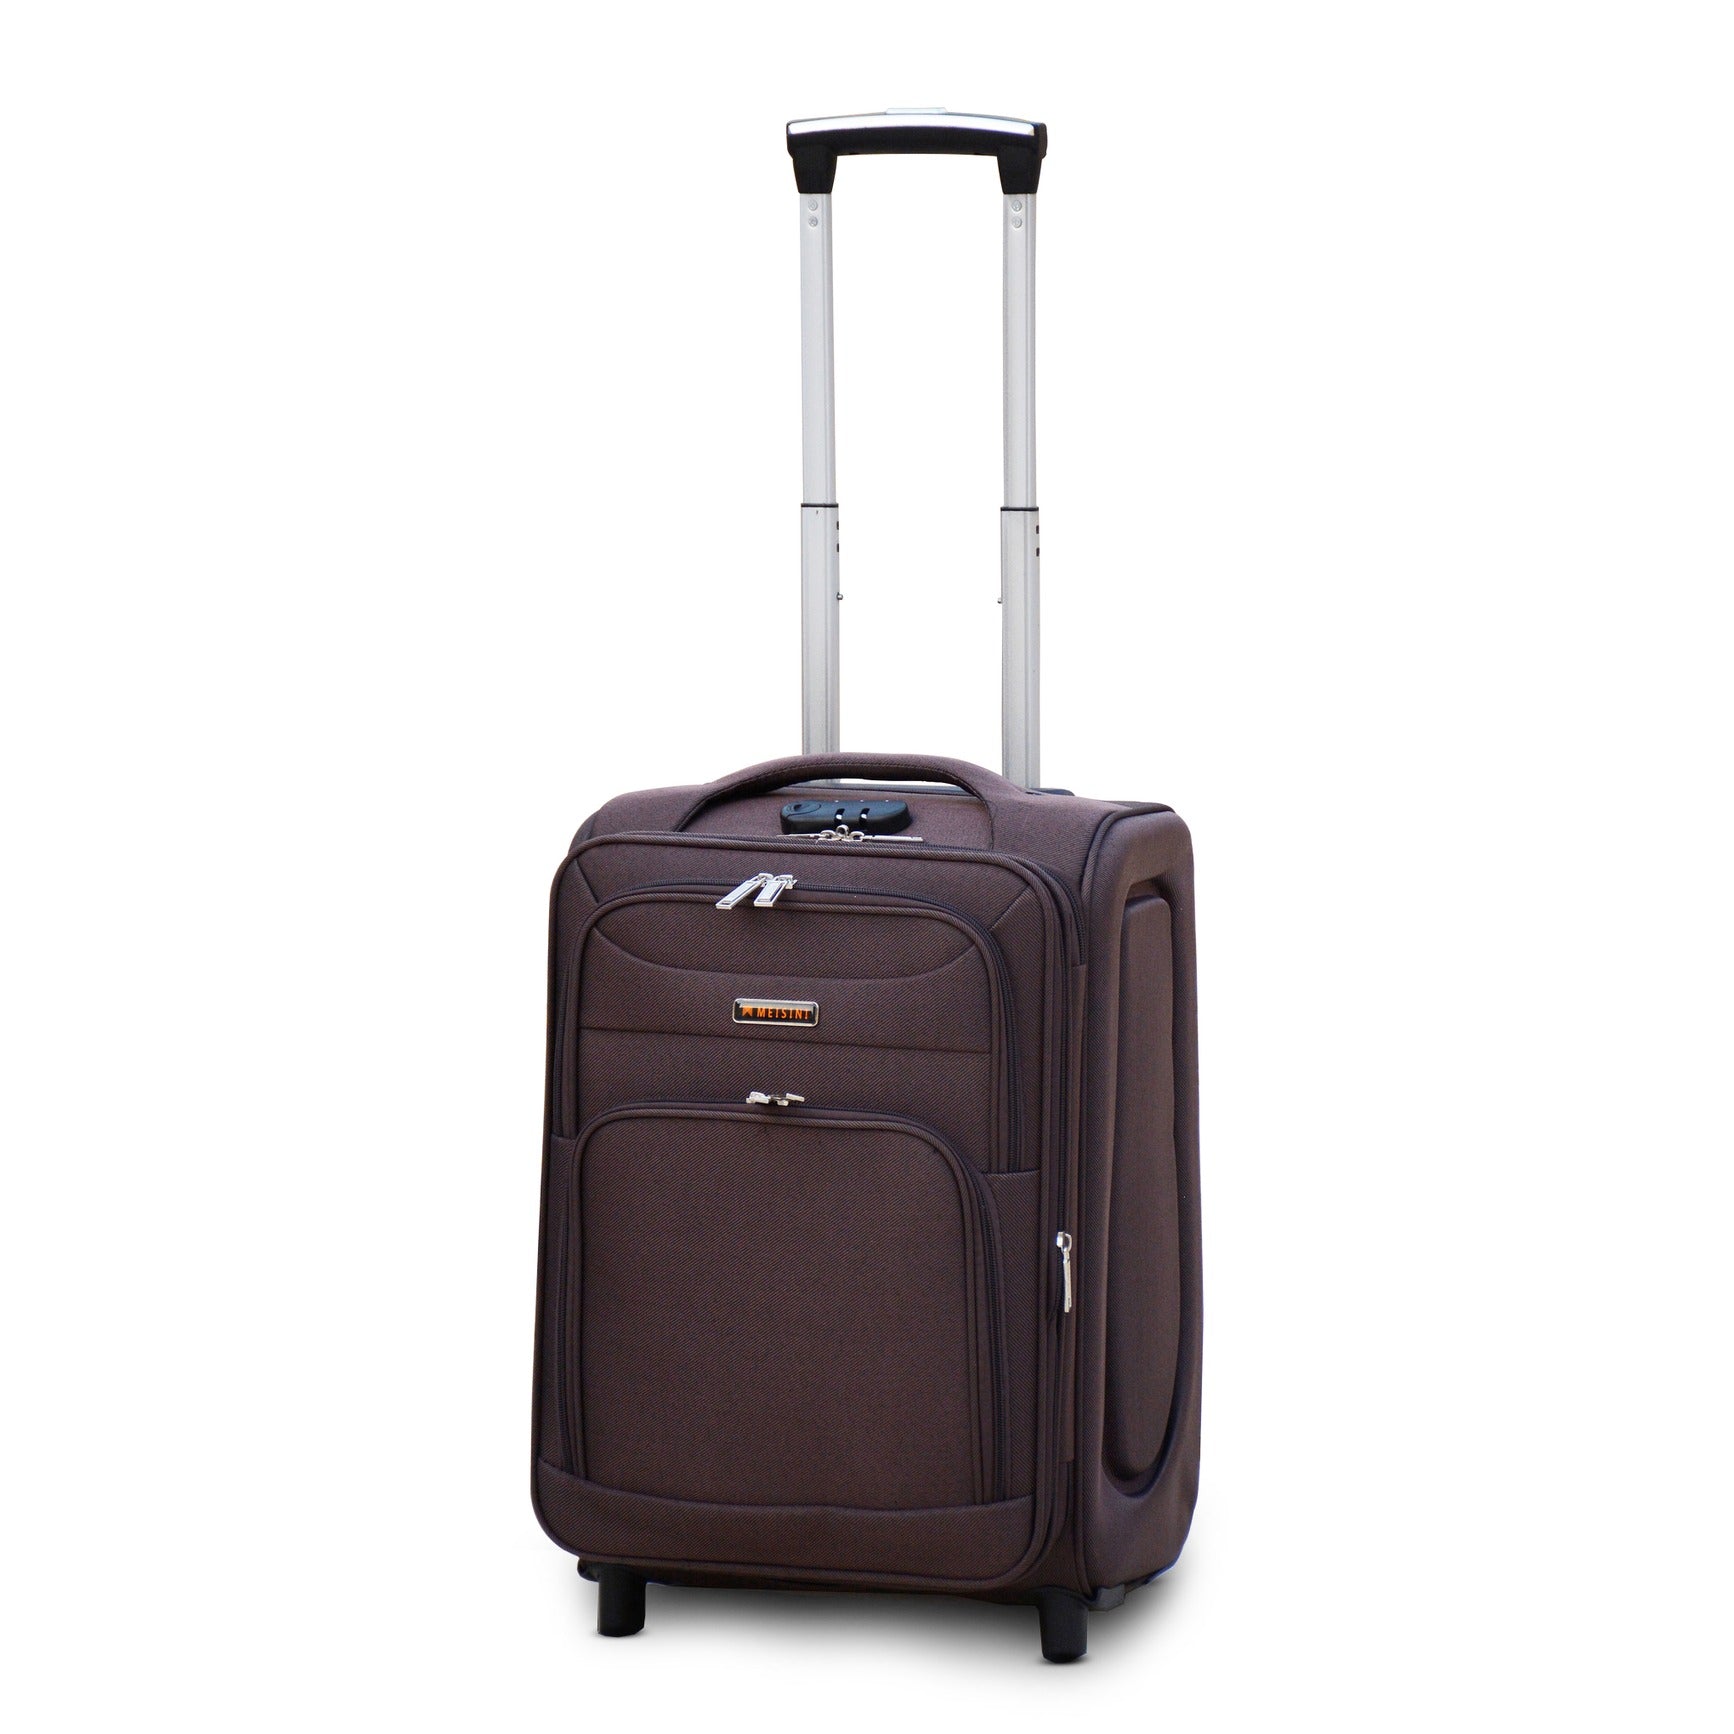 20" LP 2 Wheel 0161 Lightweight Soft Material Carry On Luggage Bag Zaappy